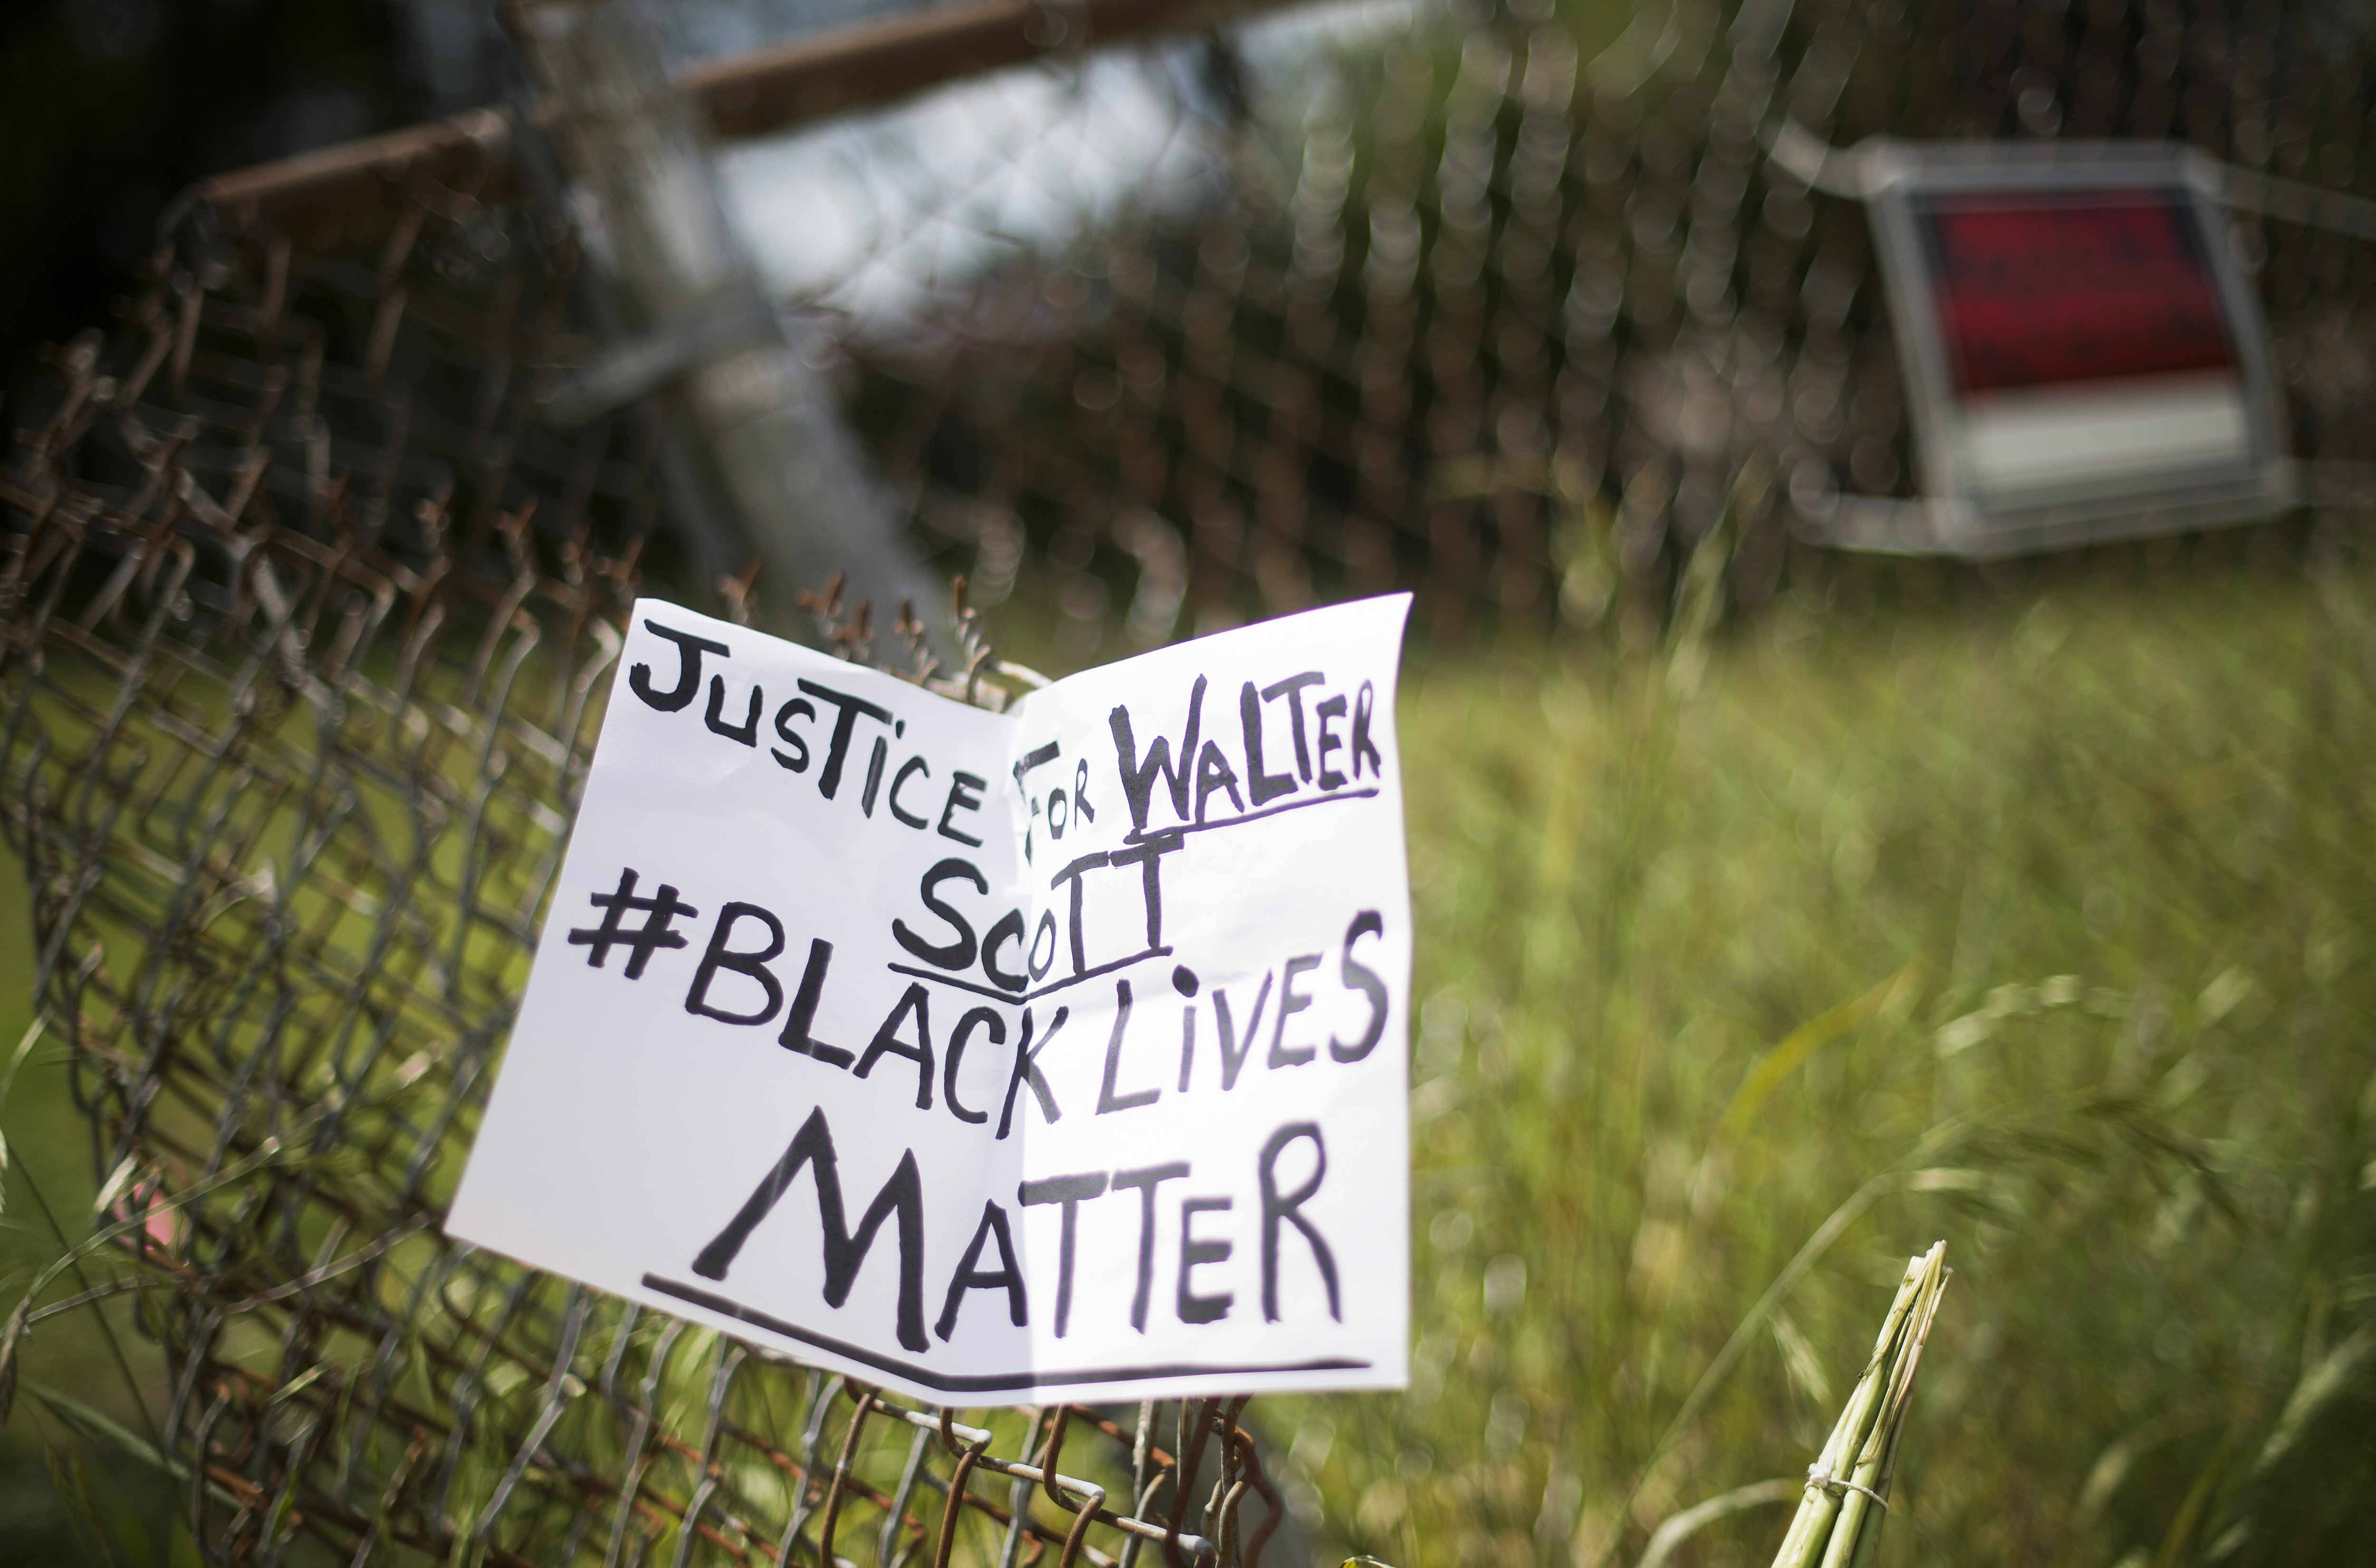 A placard is tied to a fence outside the vacant lot where Walter Scott, the 50-year-old man who was fired at eight times was killed as he ran away from an officer after a traffic stop in North Charleston, South Carolina on April 8, 2015. Police officer Michael Slager,33, who fatally shot Scott in the US city of North Charleston has been fired after he was charged with murder, the mayor said. Speaking at a highly charged press conference frequently interrupted by residents angered at America's latest high-profile police killing of a black man, Mayor Keith Summey said the city had moved quickly to fire the officer after Saturday's shooting.   AFP PHOTO/JIM WATSON        (Photo credit should read JIM WATSON/AFP via Getty Images)